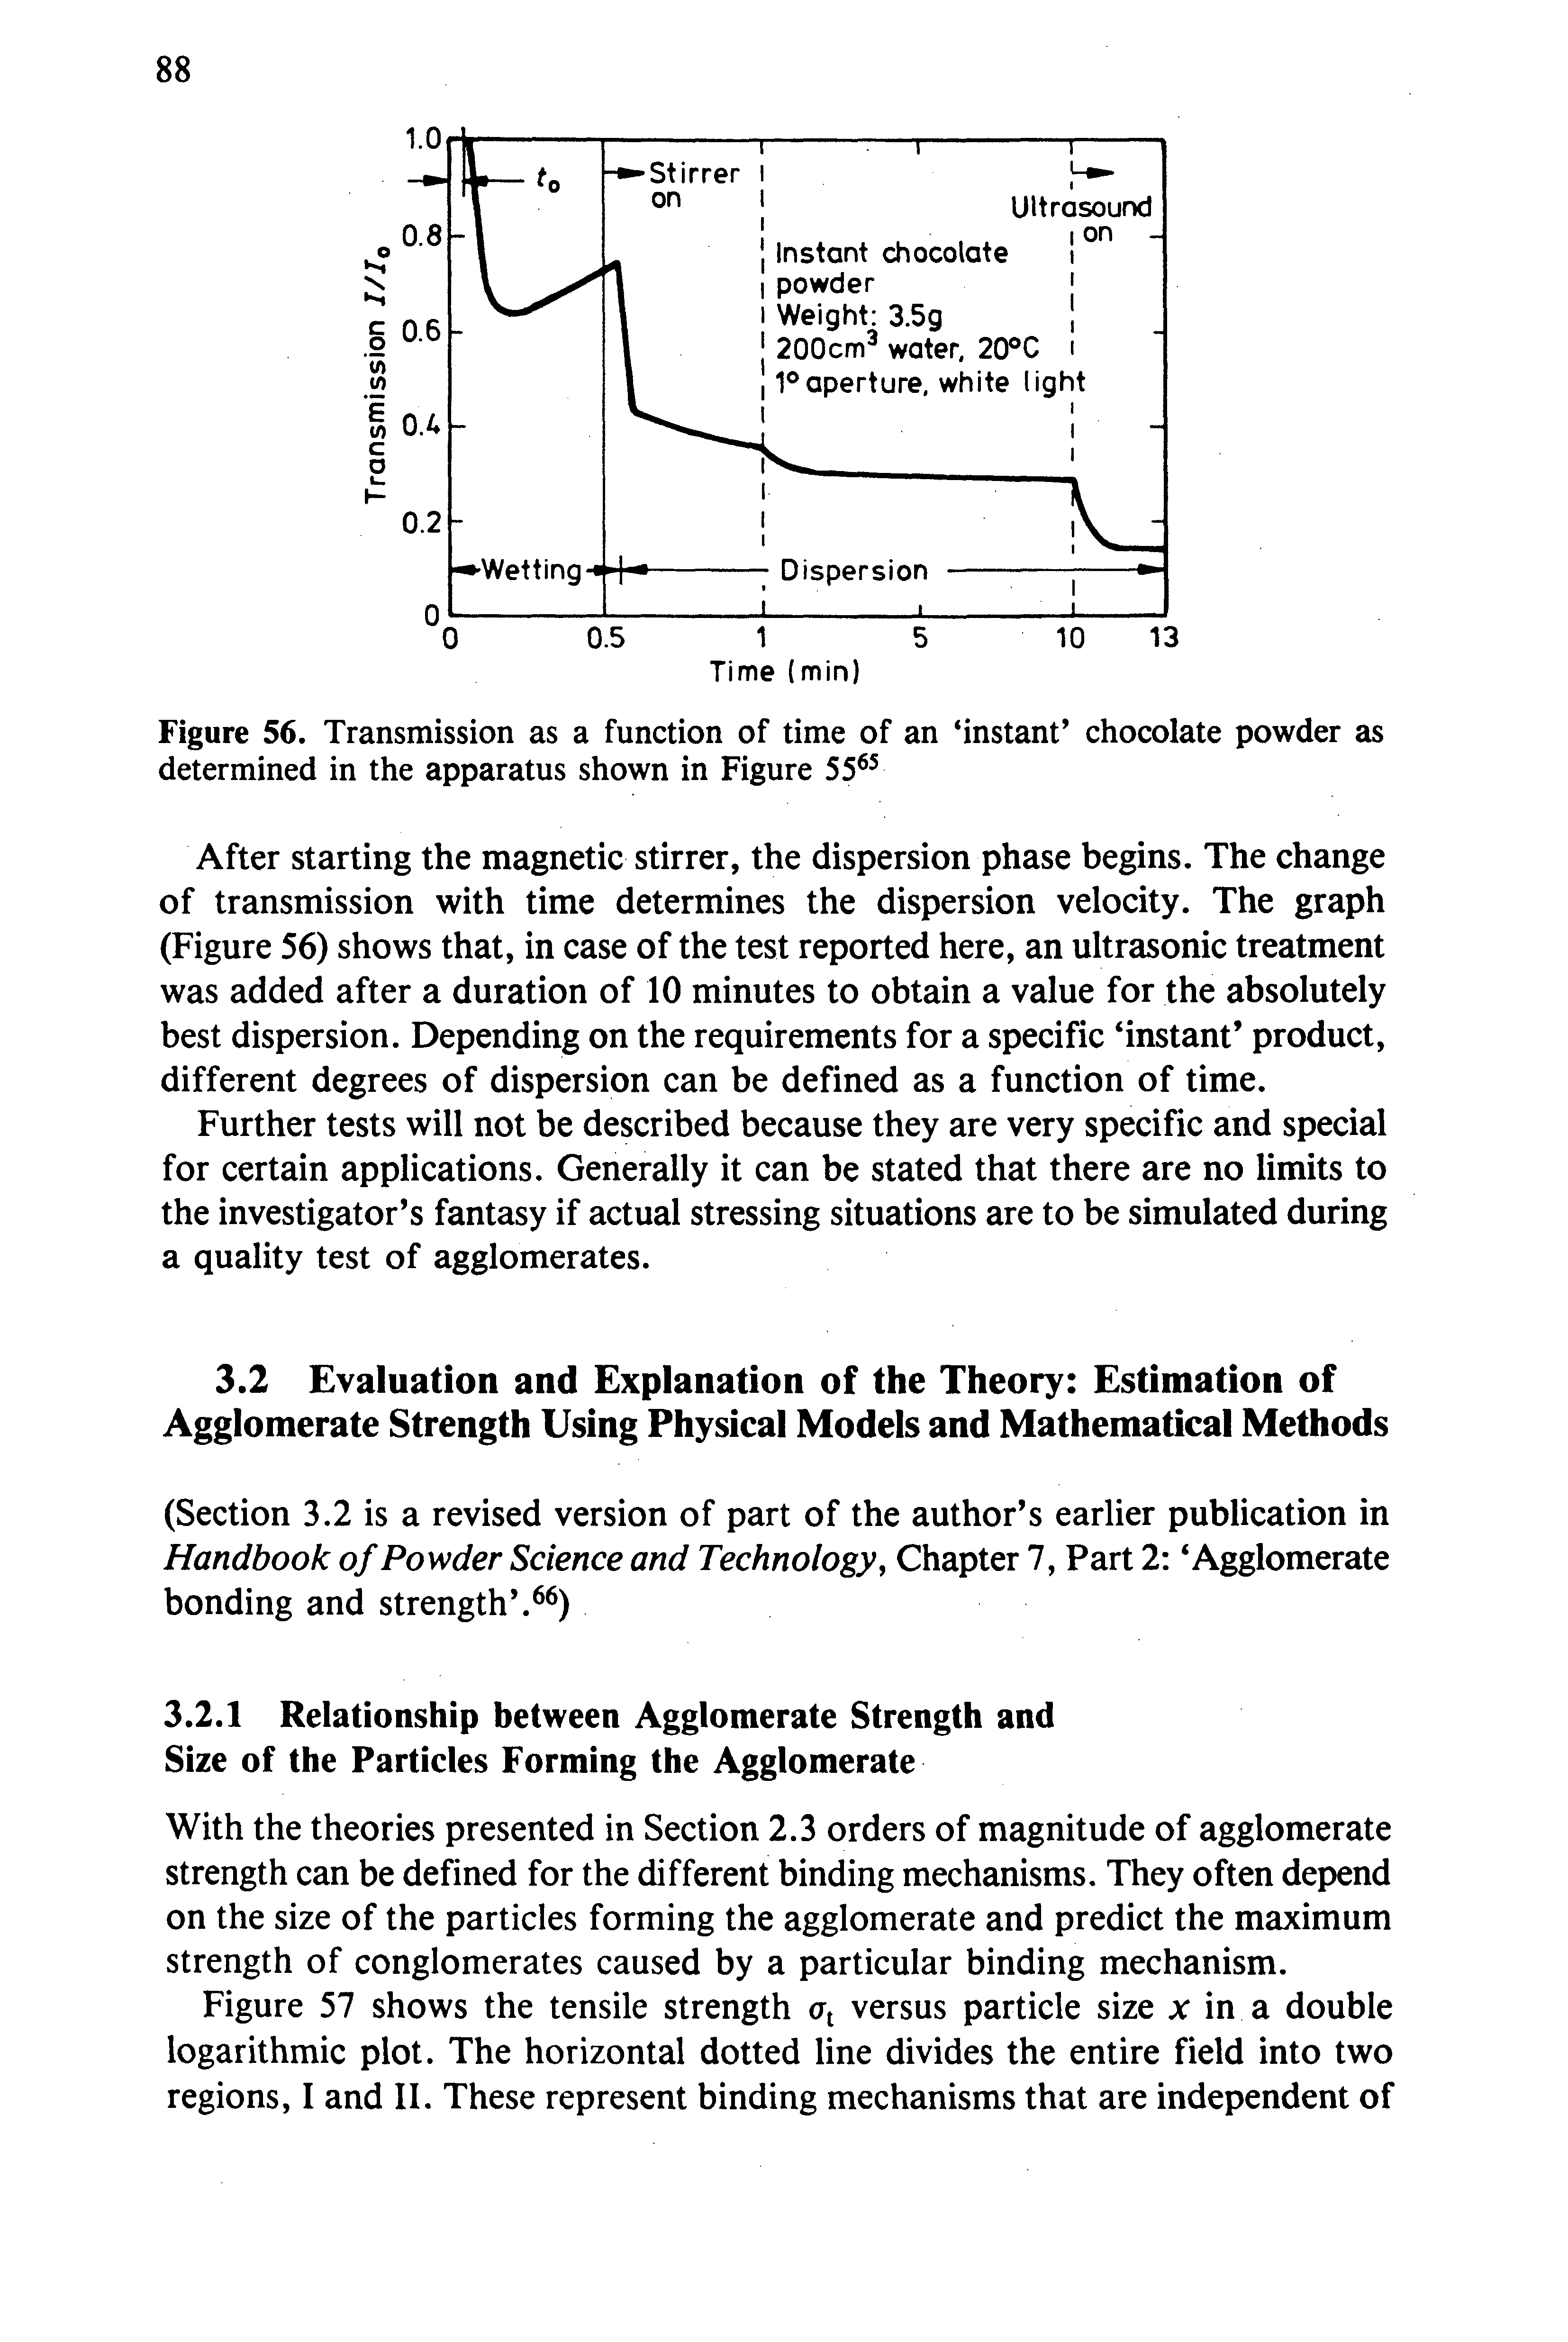 Figure 56. Transmission as a function of time of an instant chocolate powder as determined in the apparatus shown in Figure 55 ...